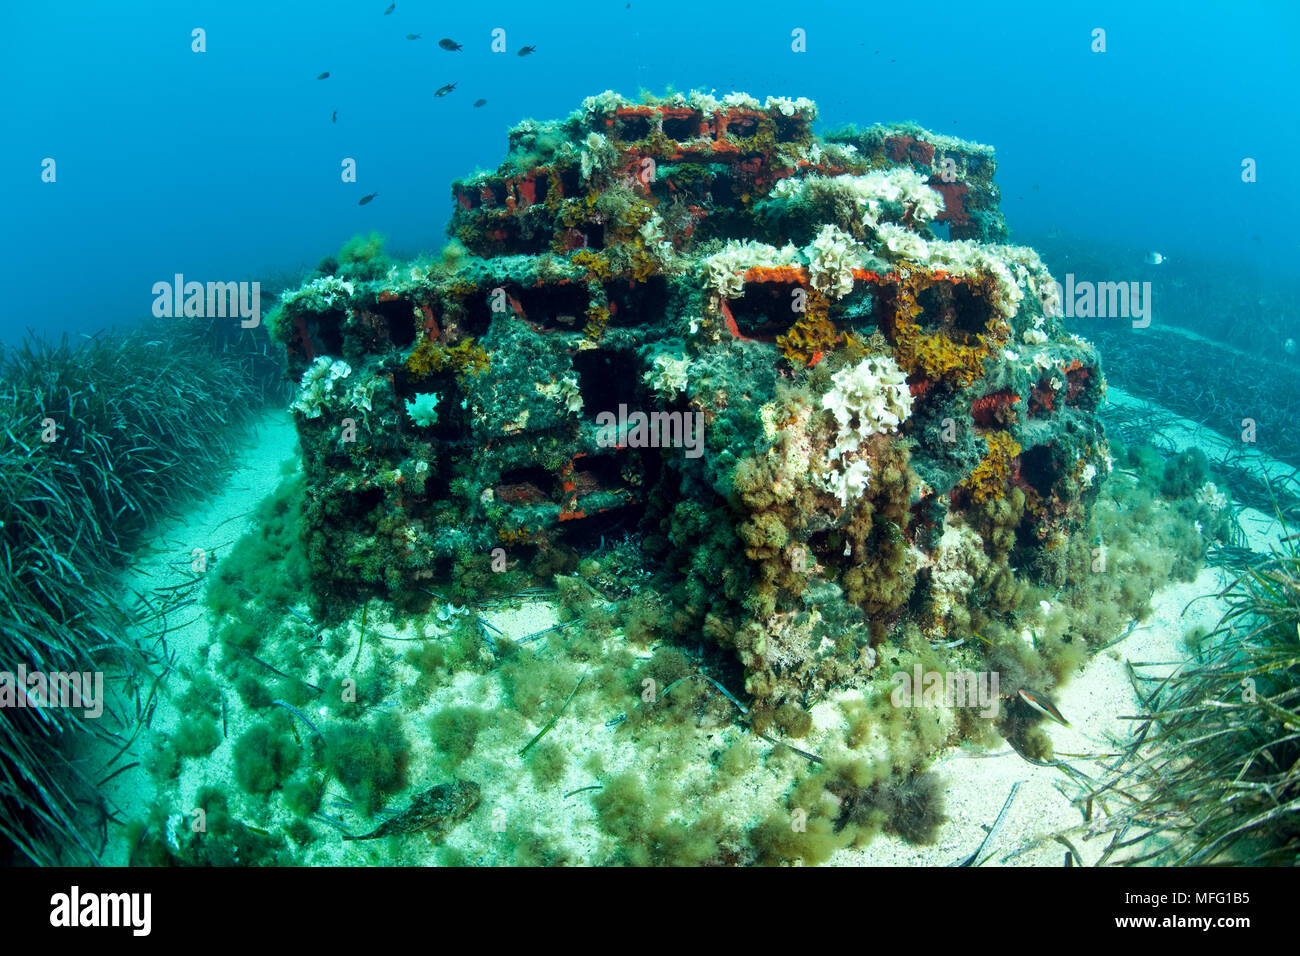 An artificial reef submerged in between the Posidonia oceanica bed, Larvotto Marine Reserve, Monaco, Mediterranean Sea  Mission: Larvotto marine Reser Stock Photo